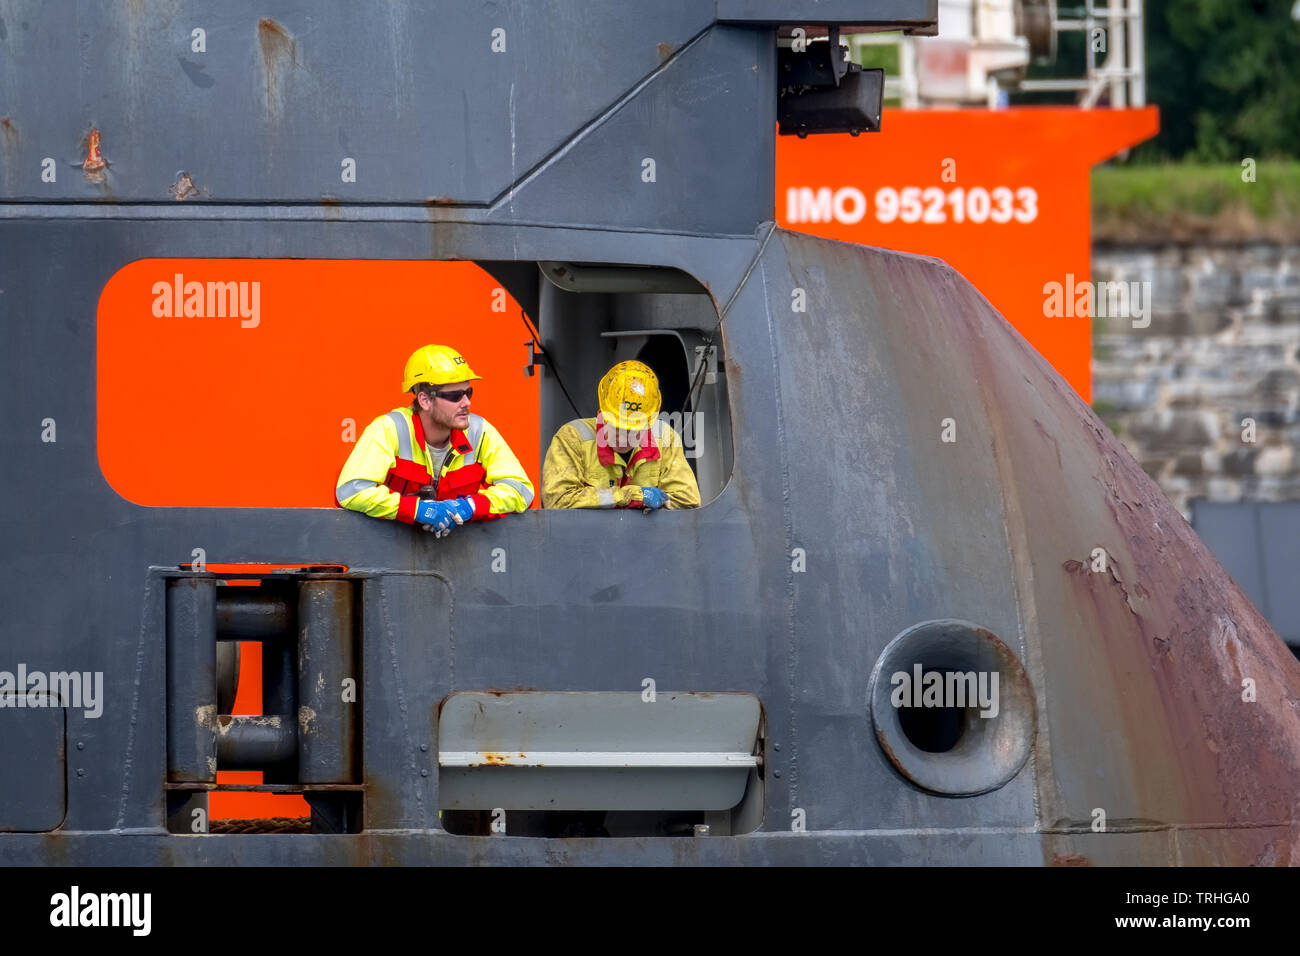 Norwegian sailors on an oil rig. Supply ship with safety helm in Bergen, Hordaland, Norway, Scandinavia, Europe, Bergen, NOR, Travel, Tourism, Travel Stock Photo